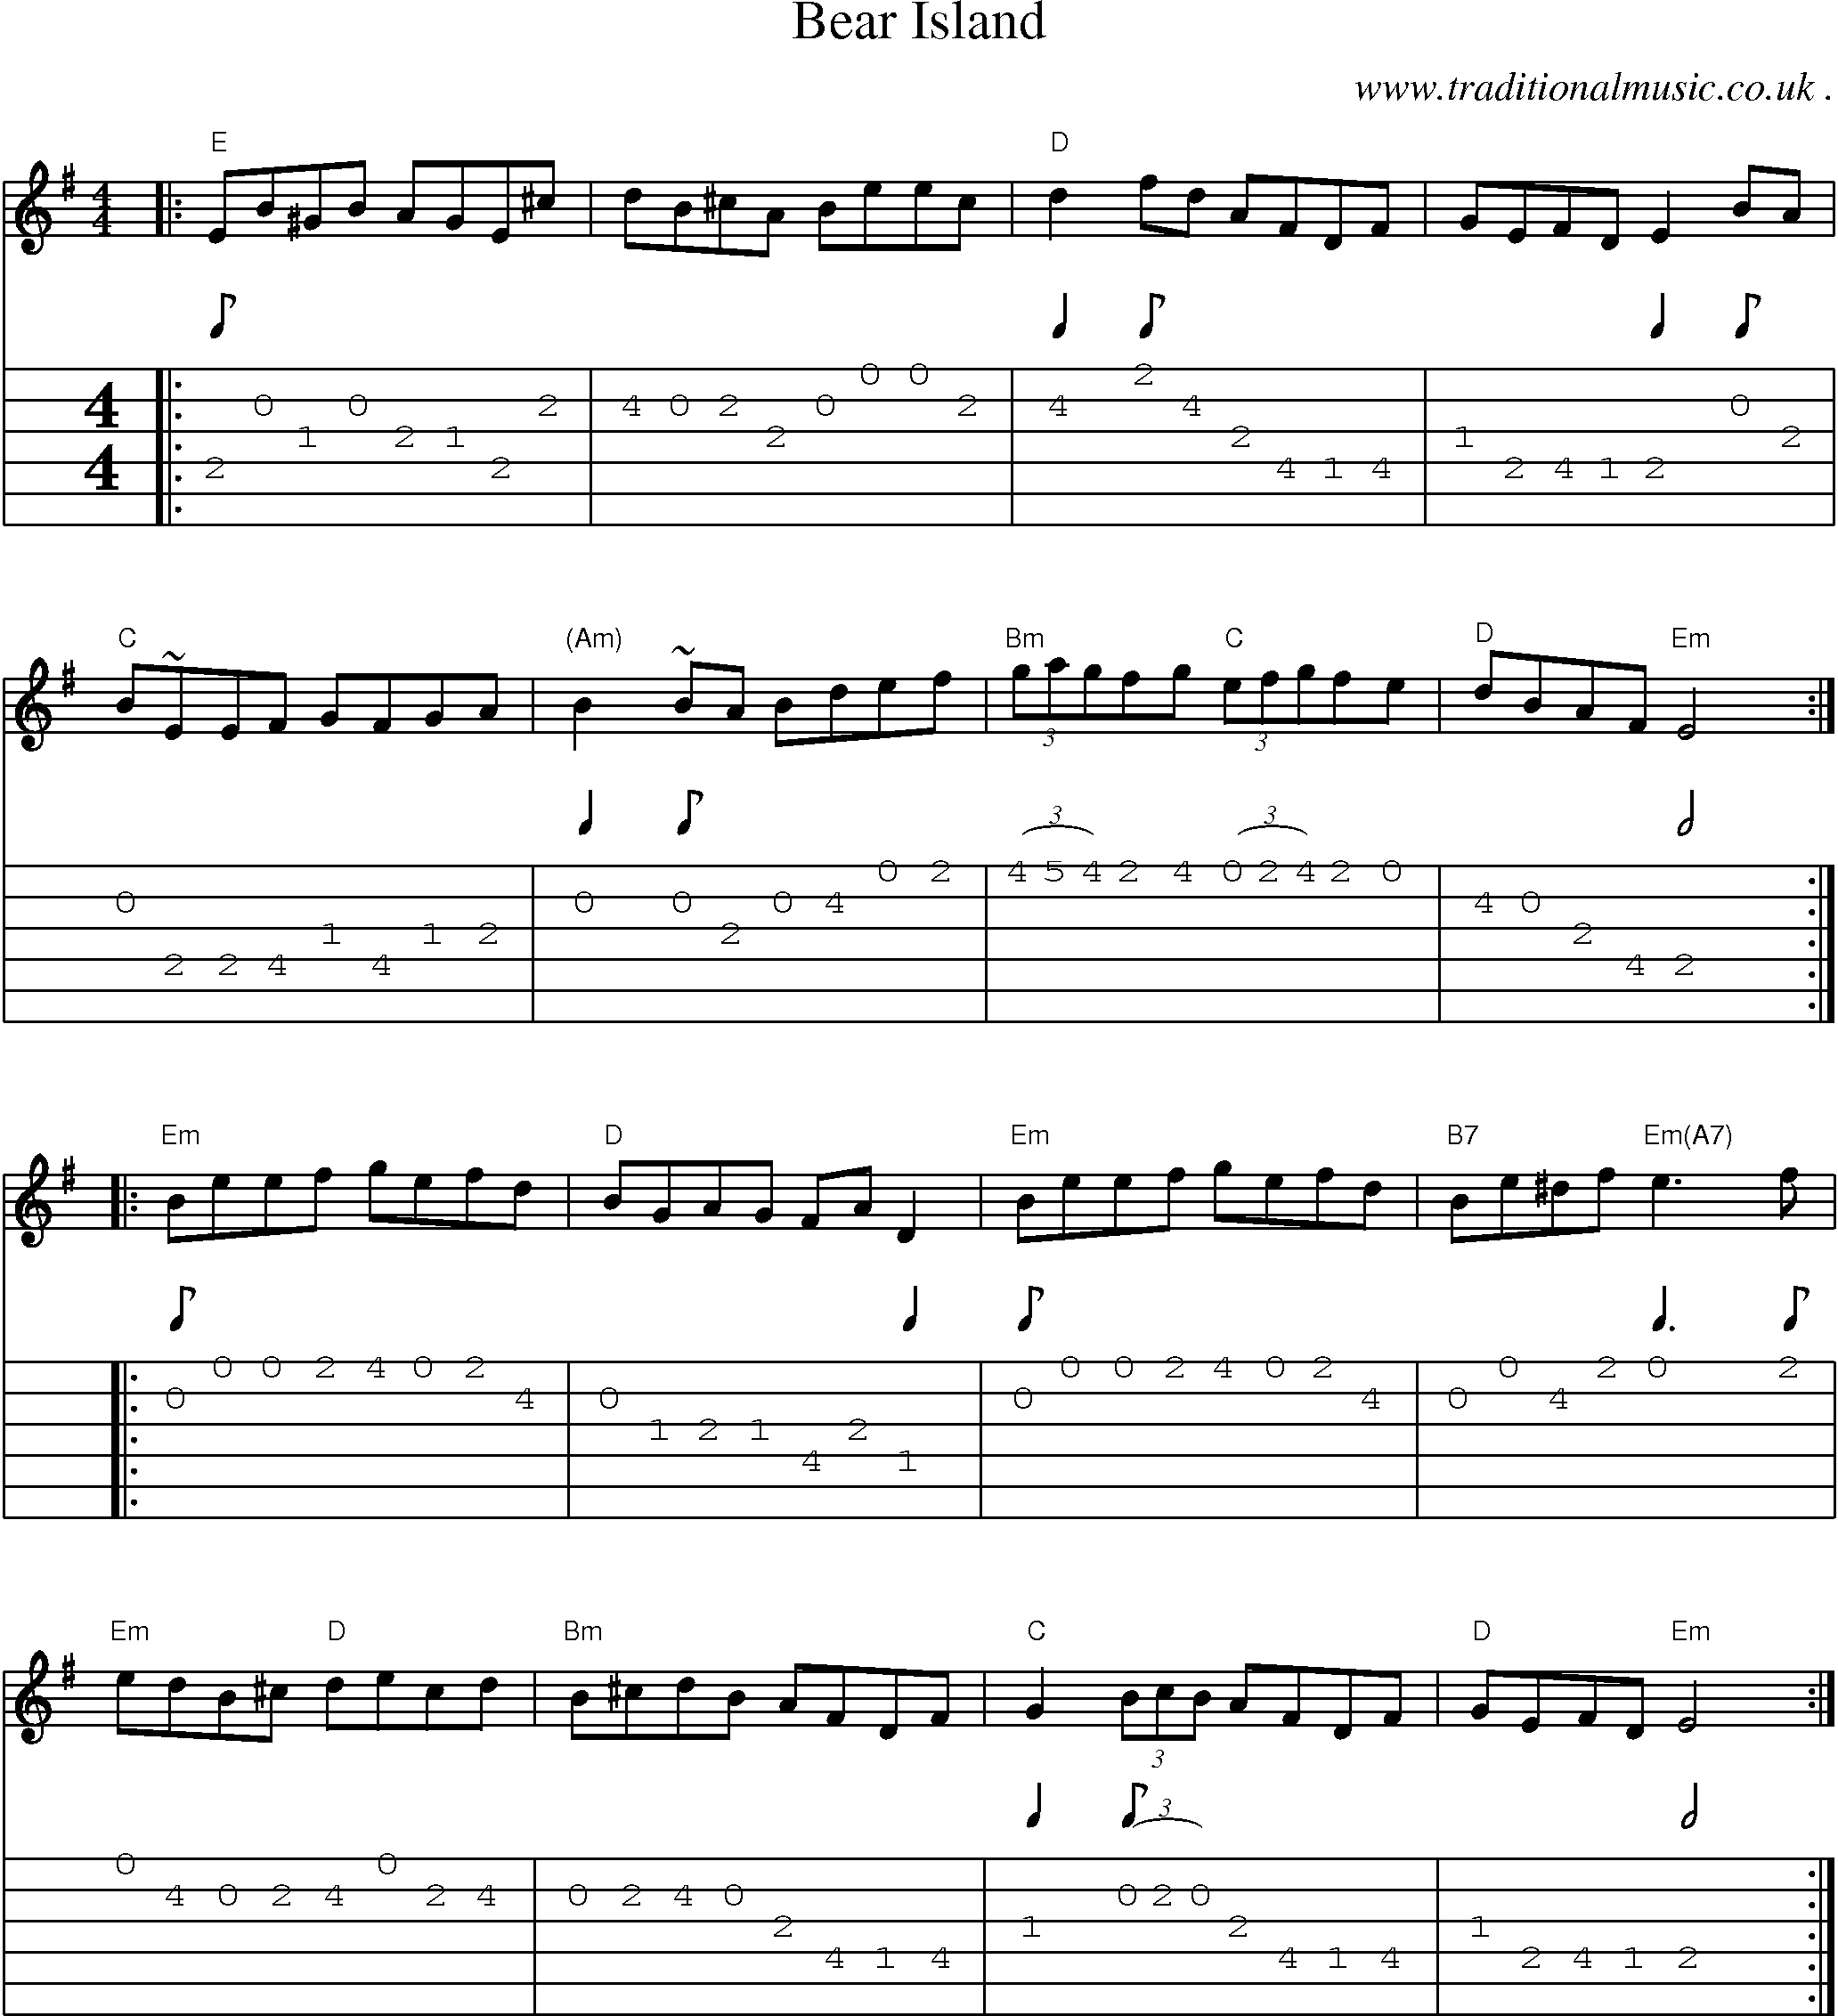 Music Score and Guitar Tabs for Bear Island